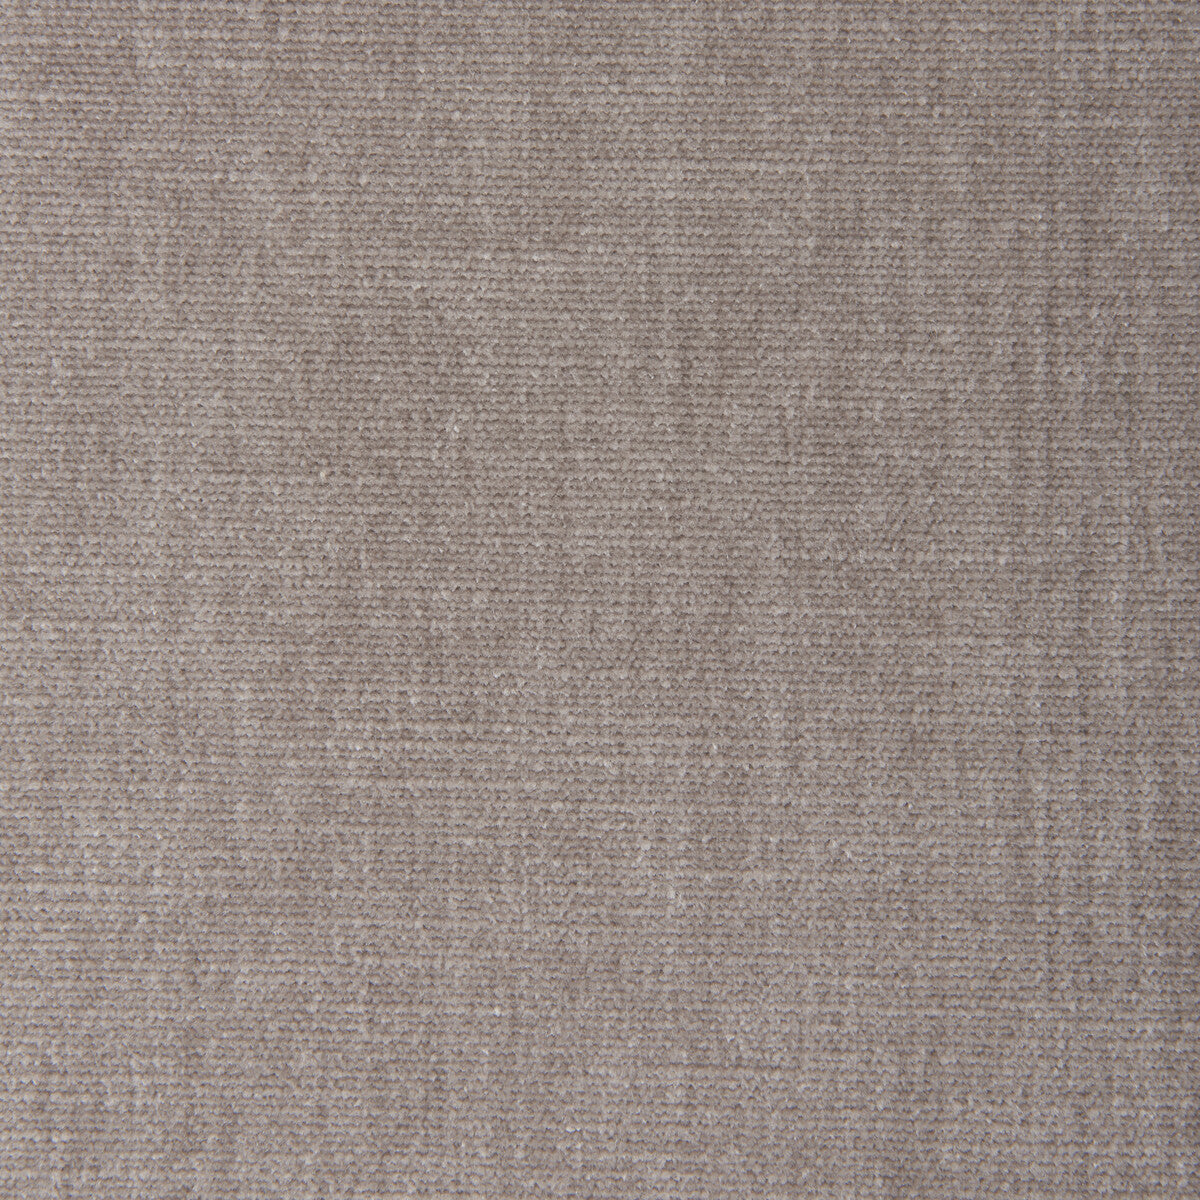 Kravet Smart fabric in 36076-1011 color - pattern 36076.1011.0 - by Kravet Smart in the Sumptuous Chenille II collection